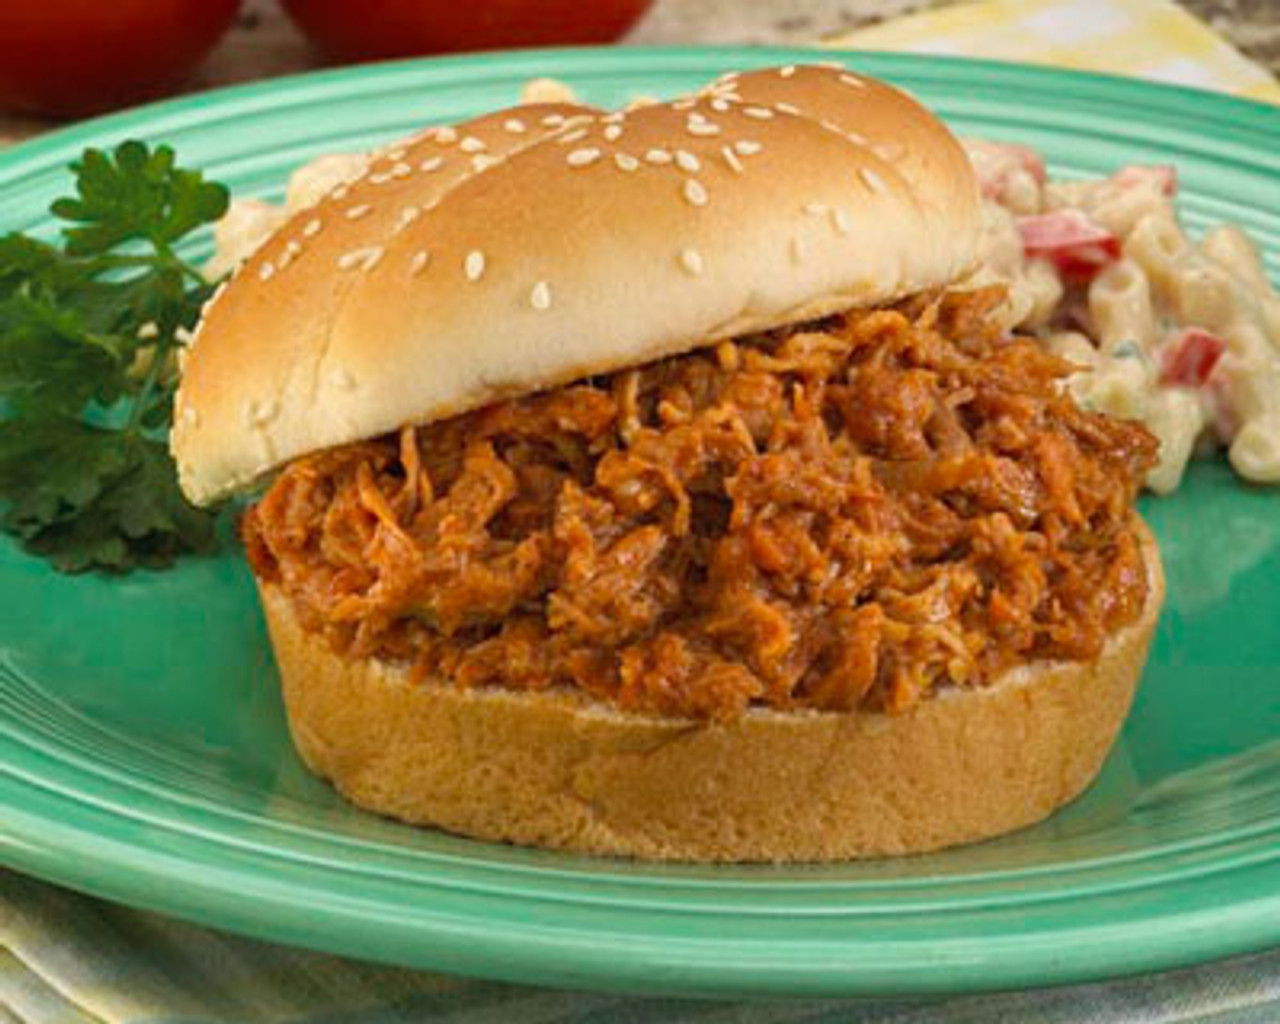 Chopped Pork Barbecue with Mild Sauce - Chandler Foods, Inc.